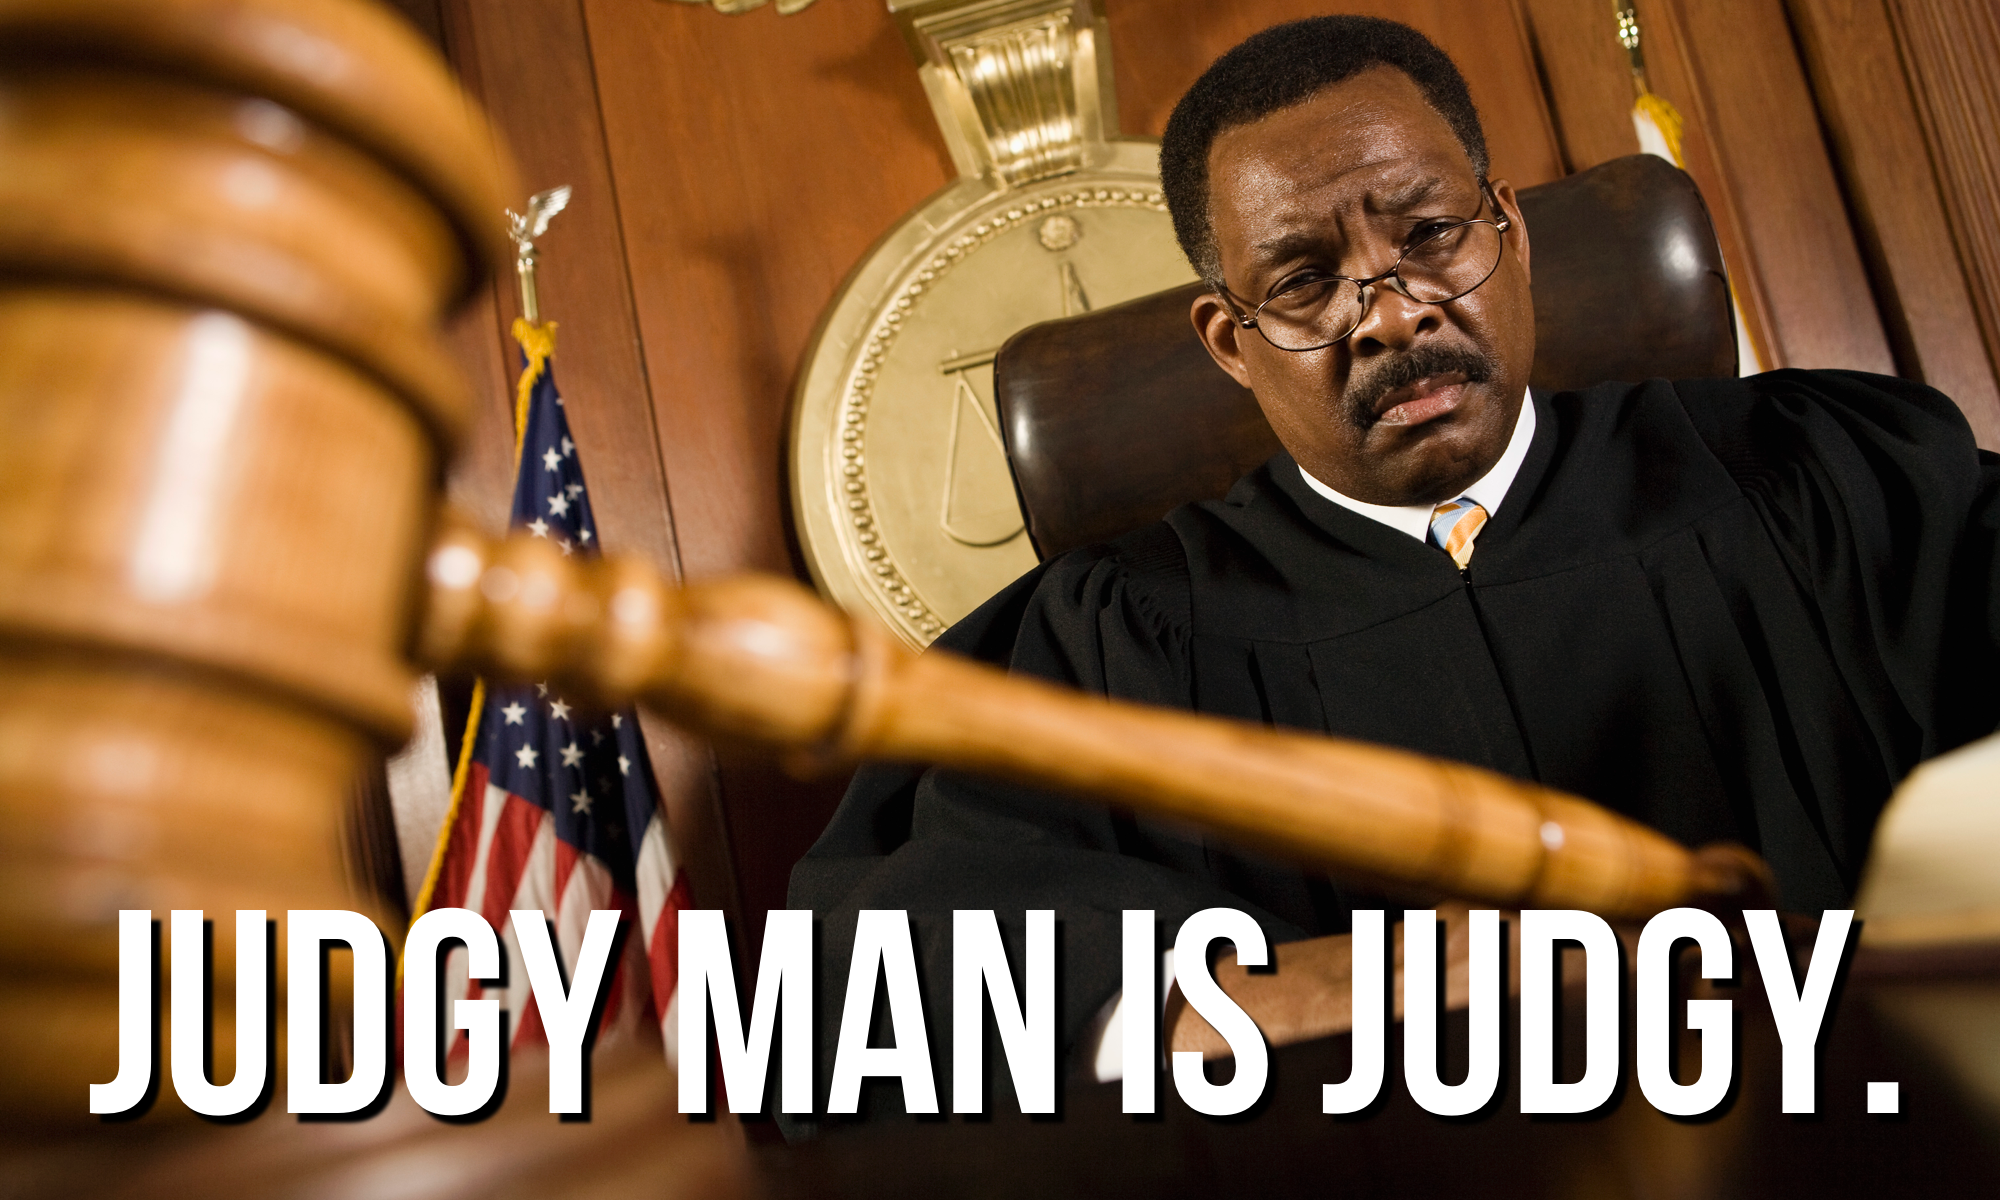 A very concerned-looking man in a judge's robe with a gavel in the foreground. Overlaid with the words "Judgy Man Is Judgy."